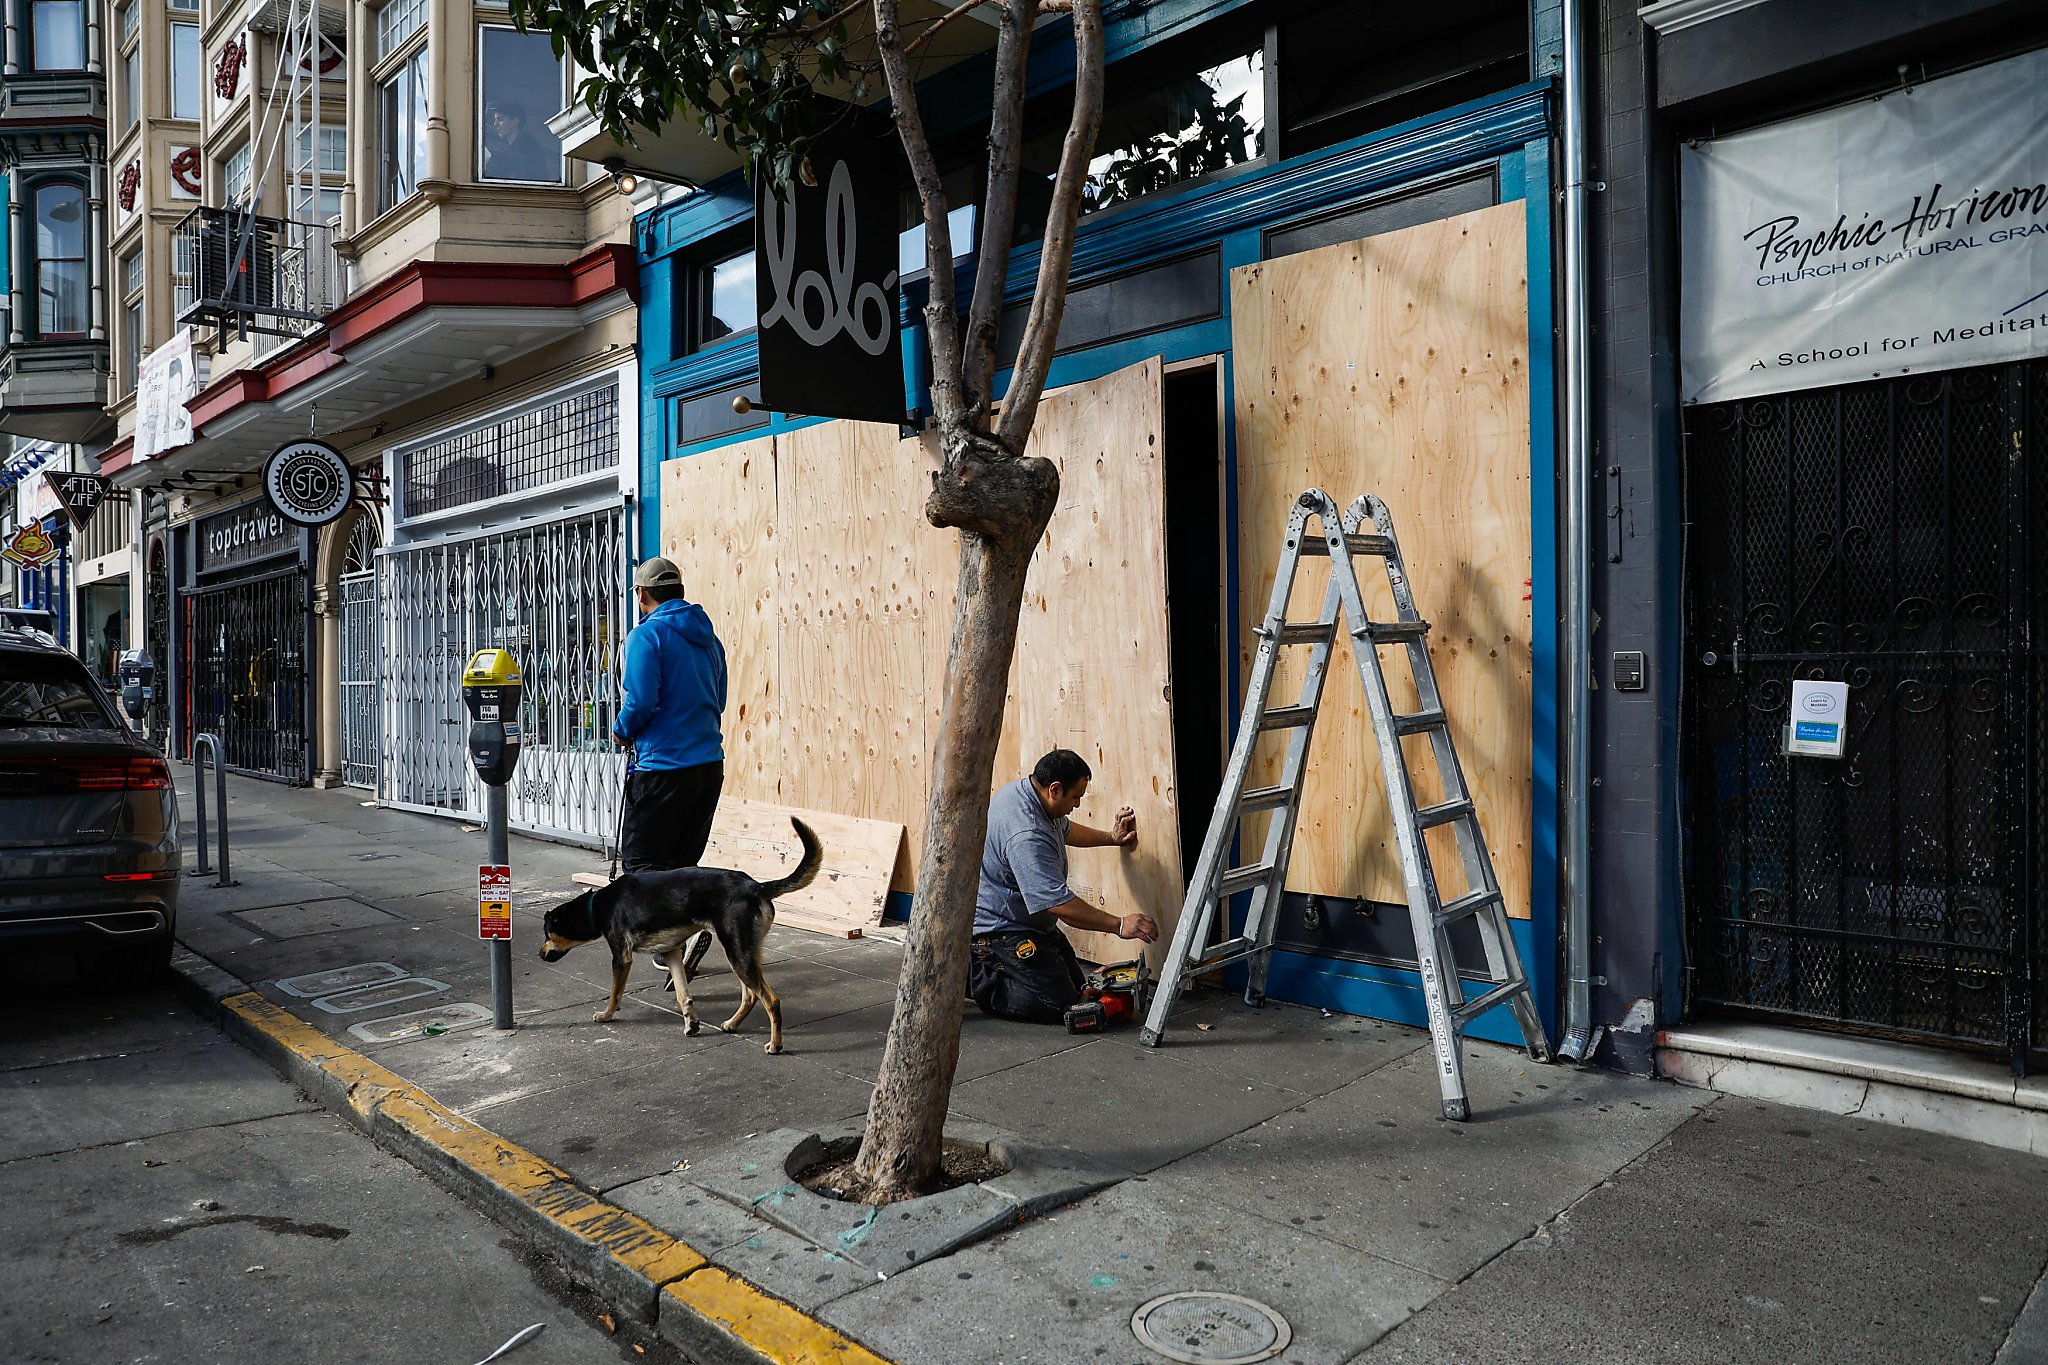 Photos show San Francisco stores' boarded-up windows after wave of